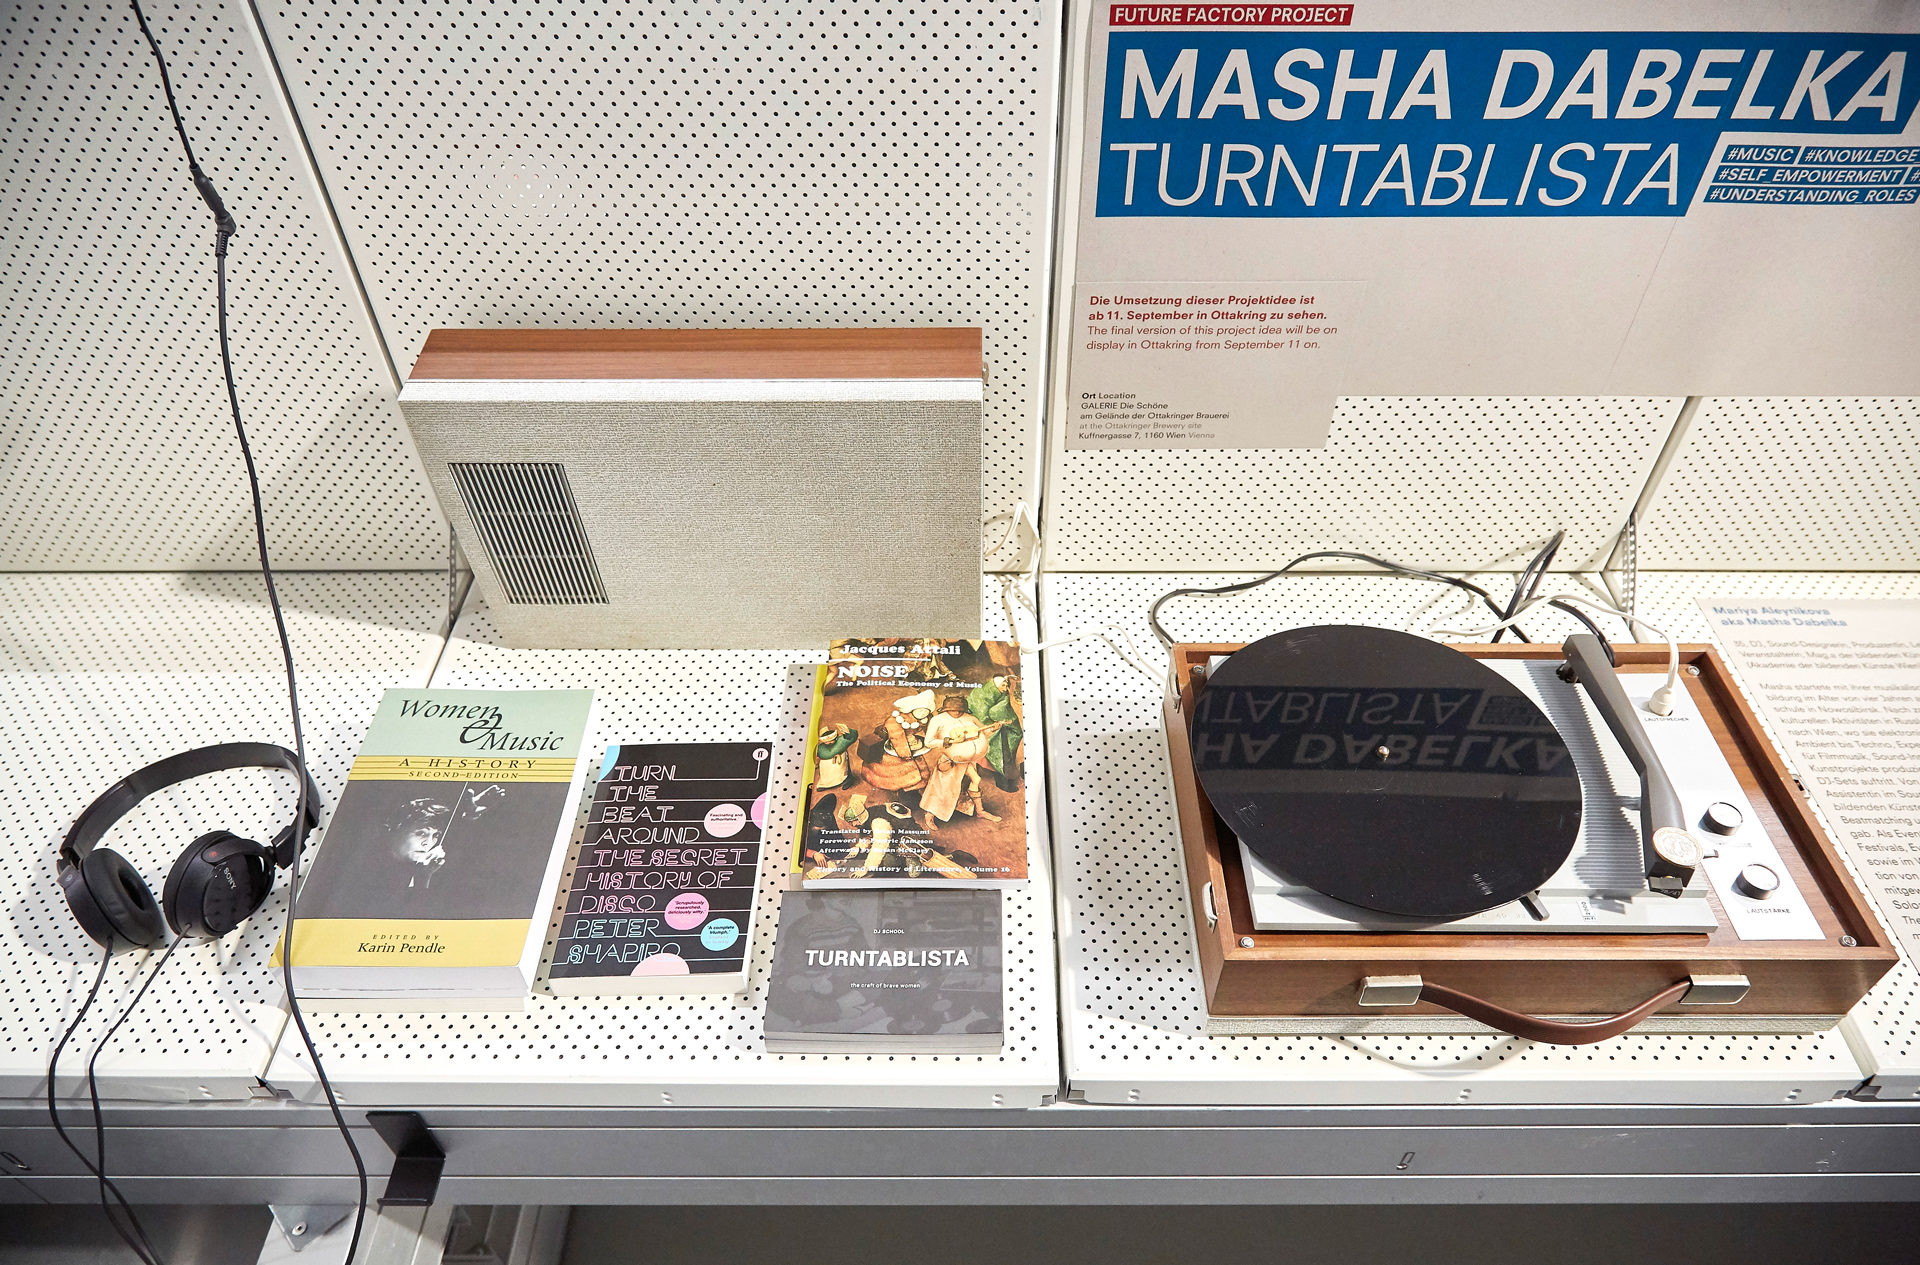 Project example "Turntablista" from the Future Factory exhibition. Record players and books in exhibition architecture